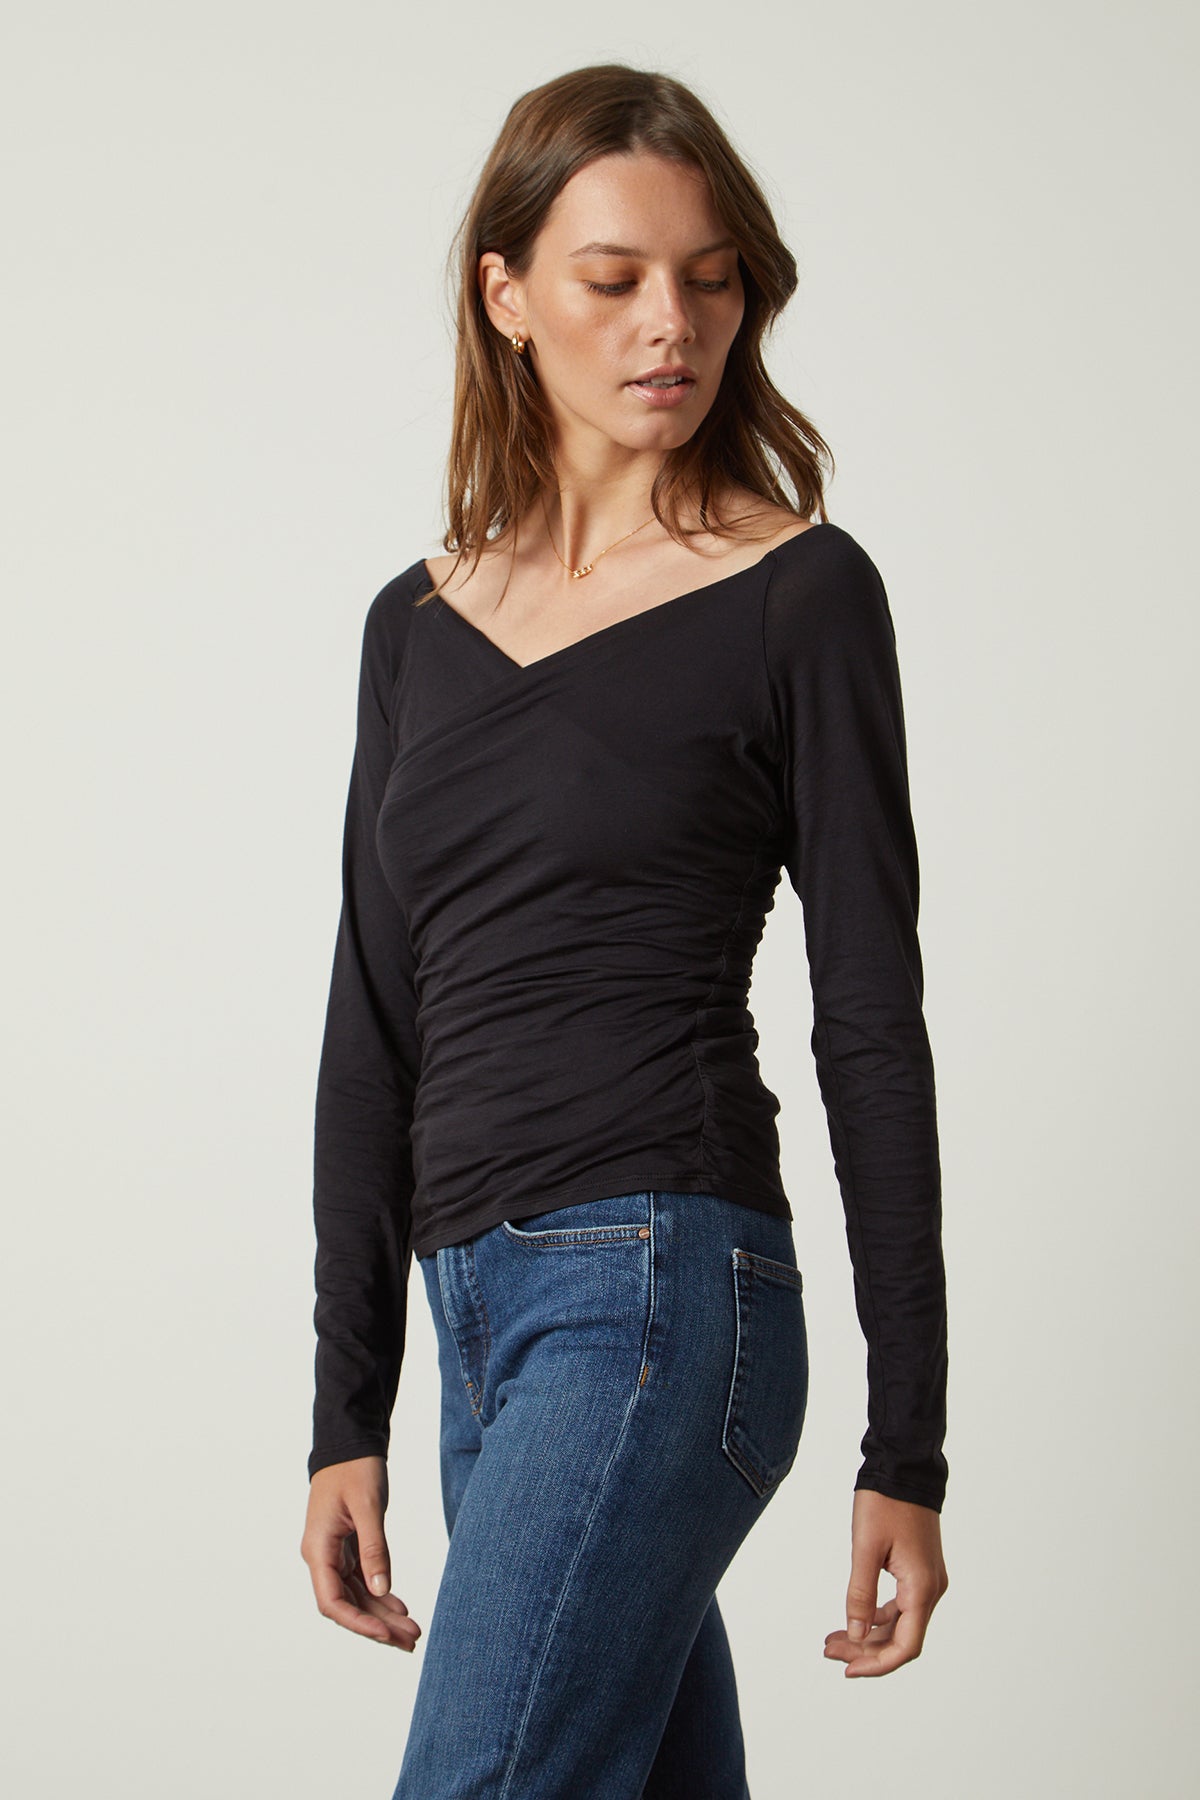   Tabbie Shirred Fitted Tee in black with blue denim front & side 